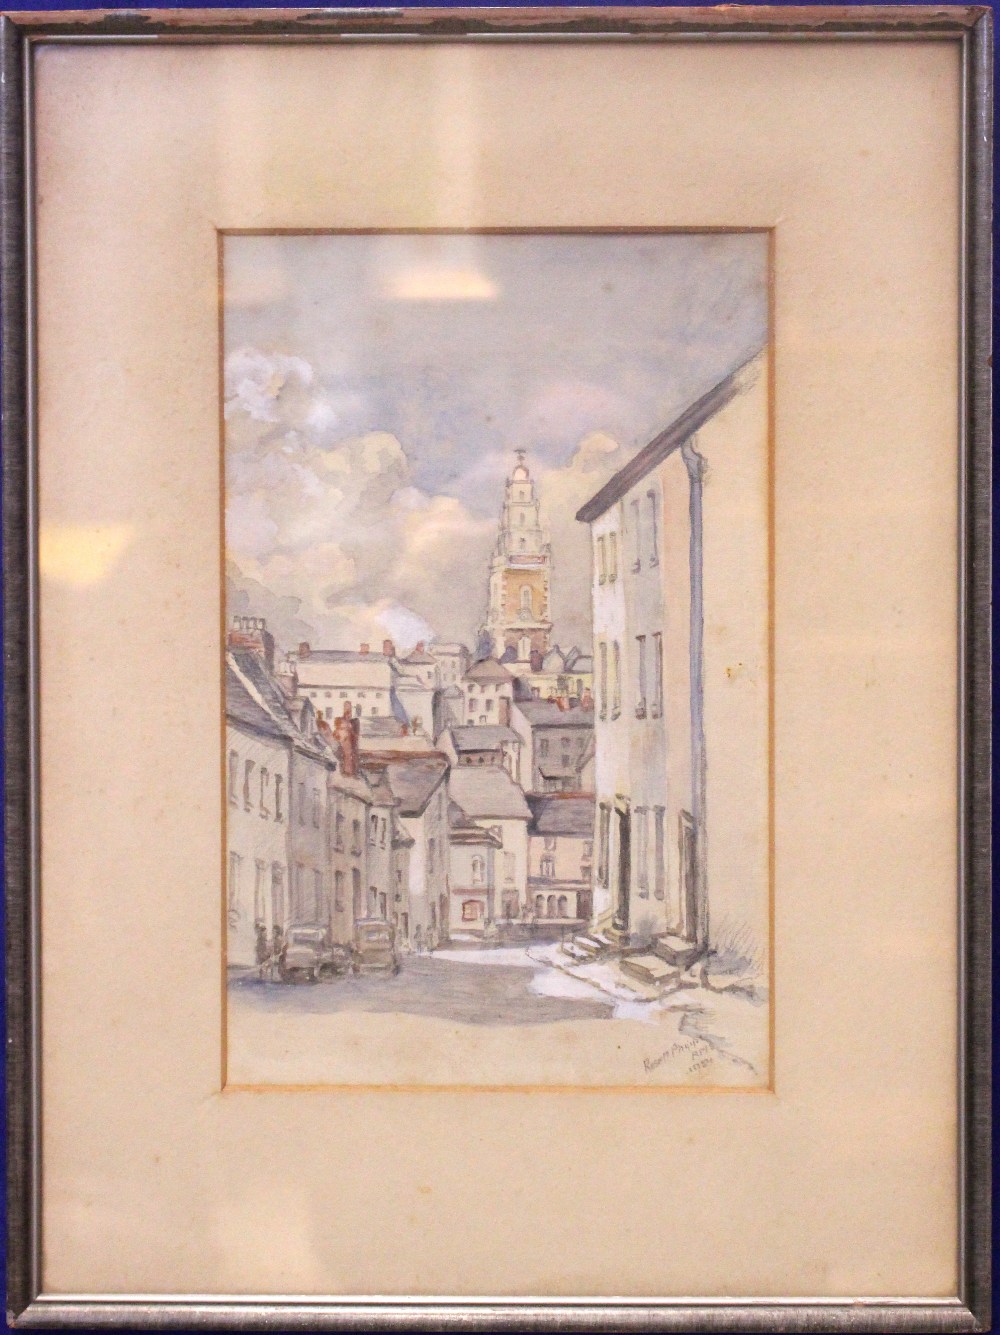 ROSE M. PHIPPS, "CORK CITY STREET, WITH SHANDON BELLS BEYOND", watercolour over pencil on paper,